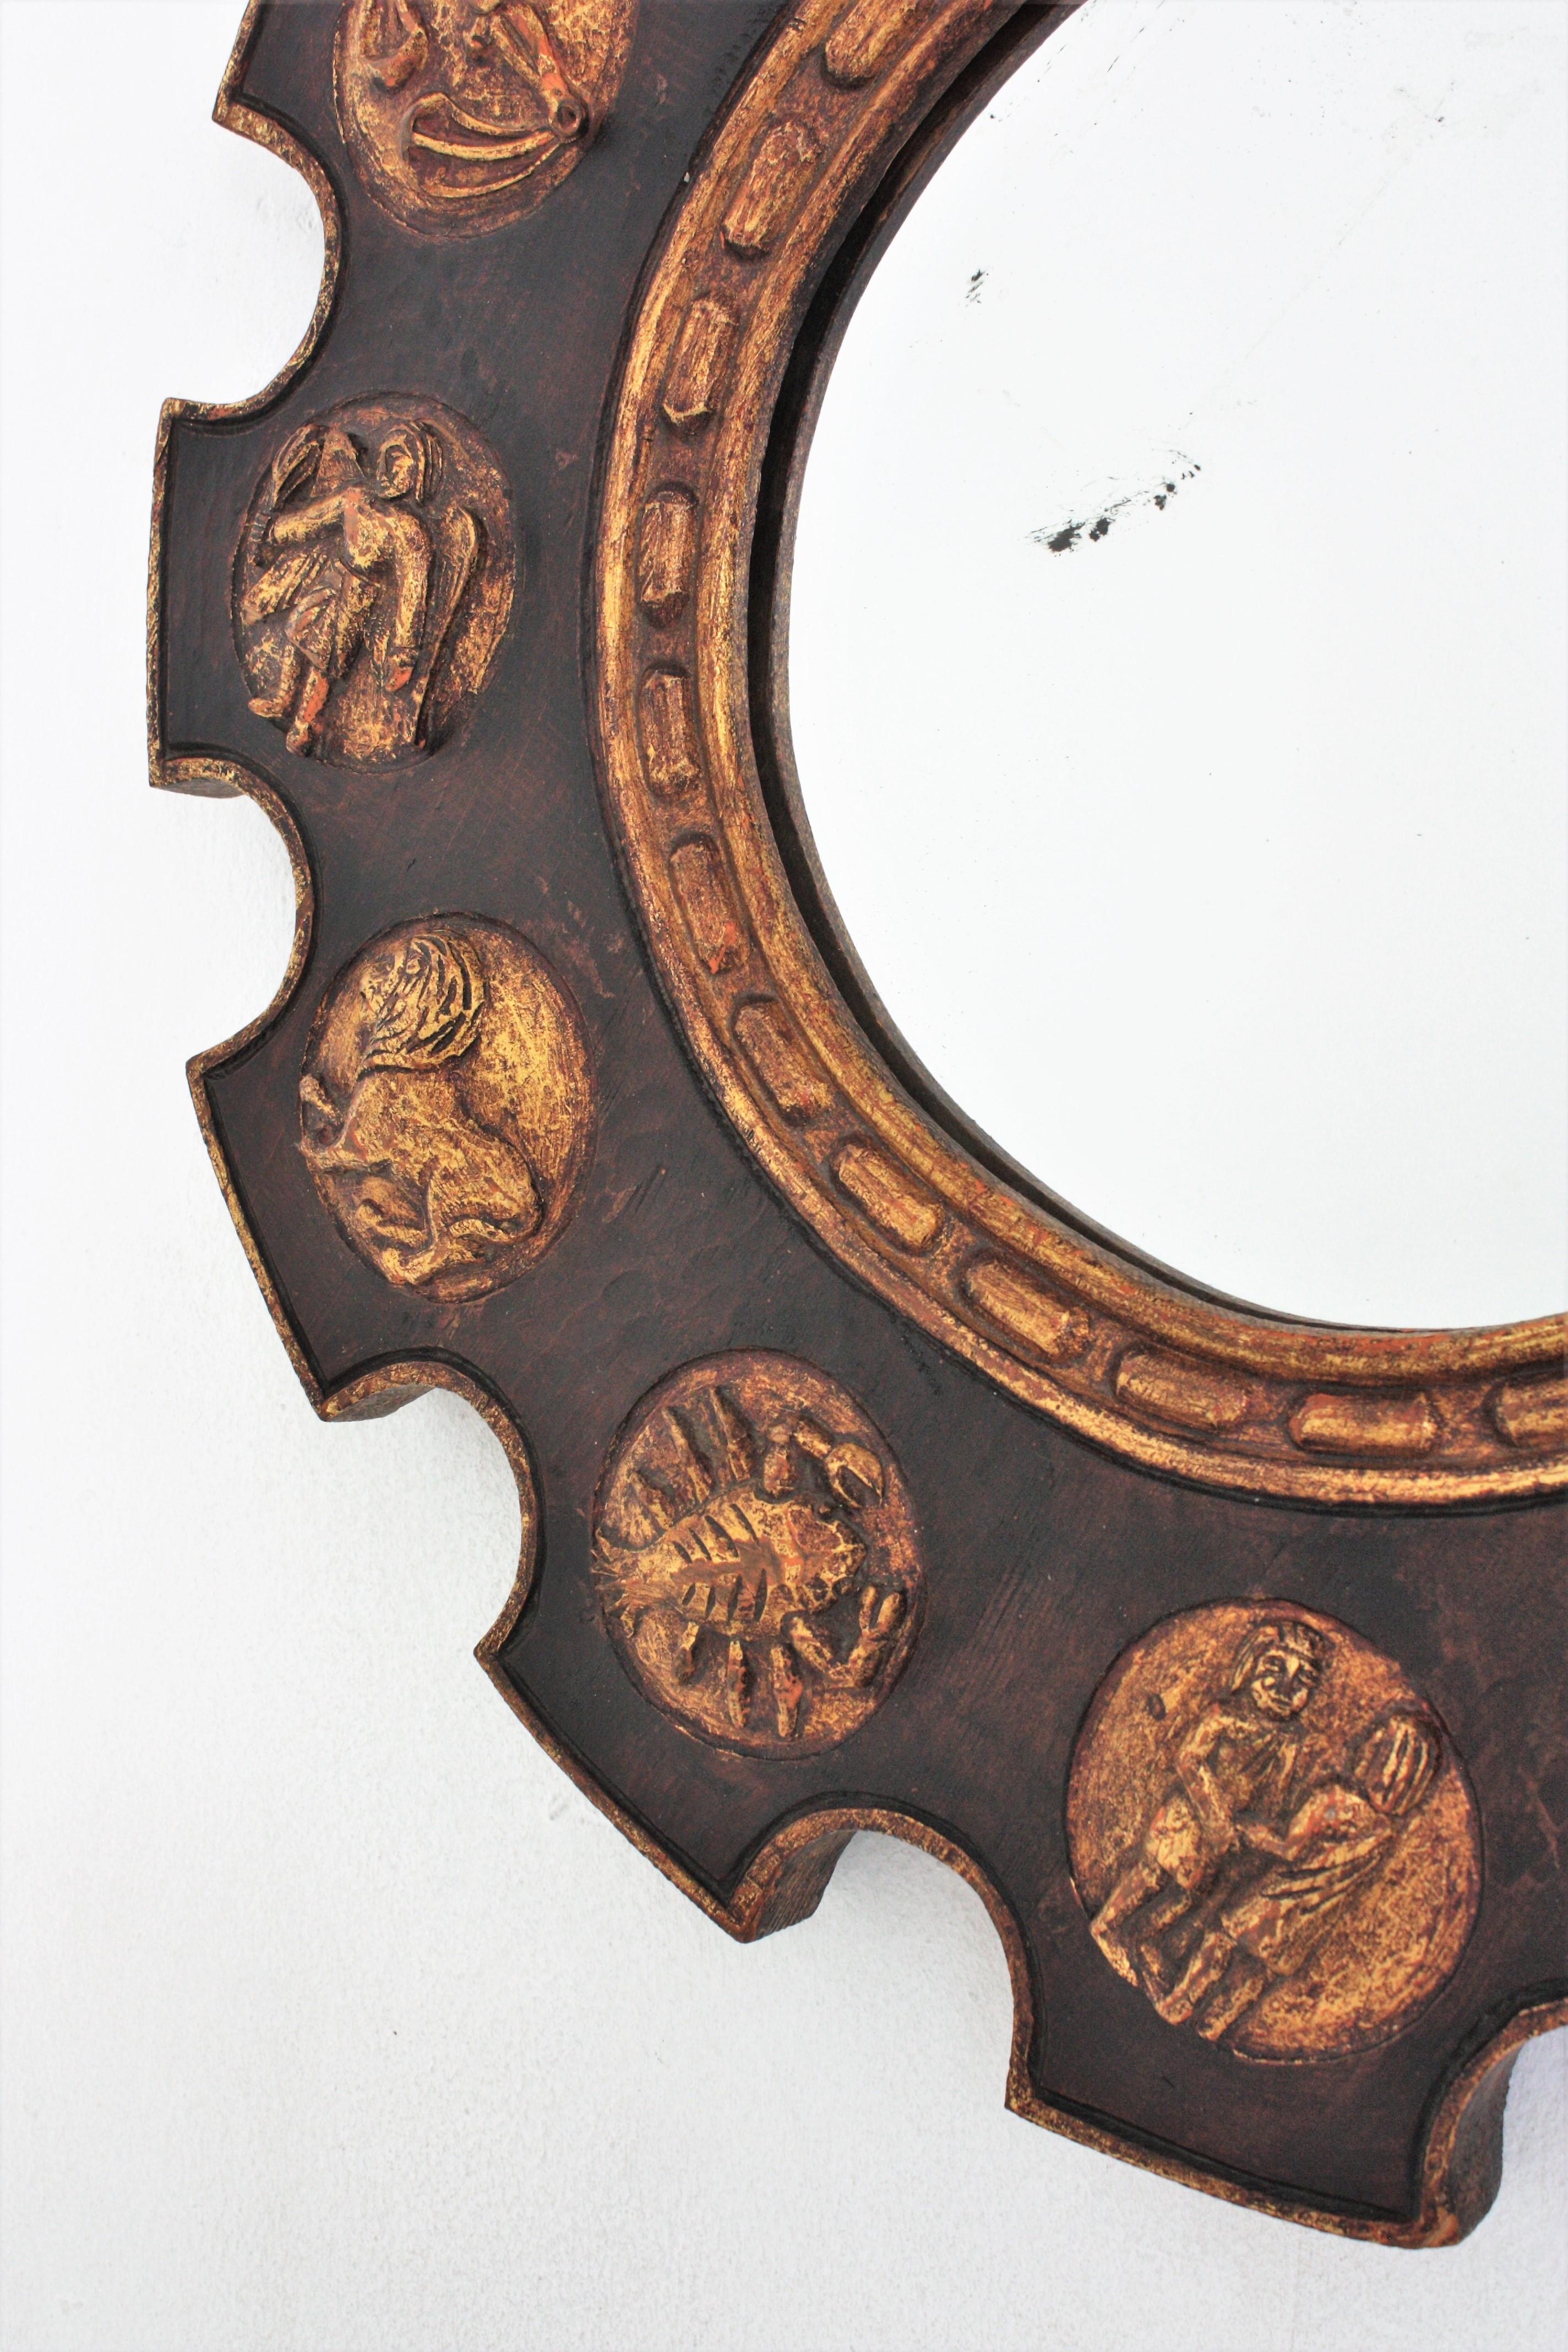 Spanish Zodiac Sunburst Mirror with Brown Giltwood Carved Frame For Sale 3